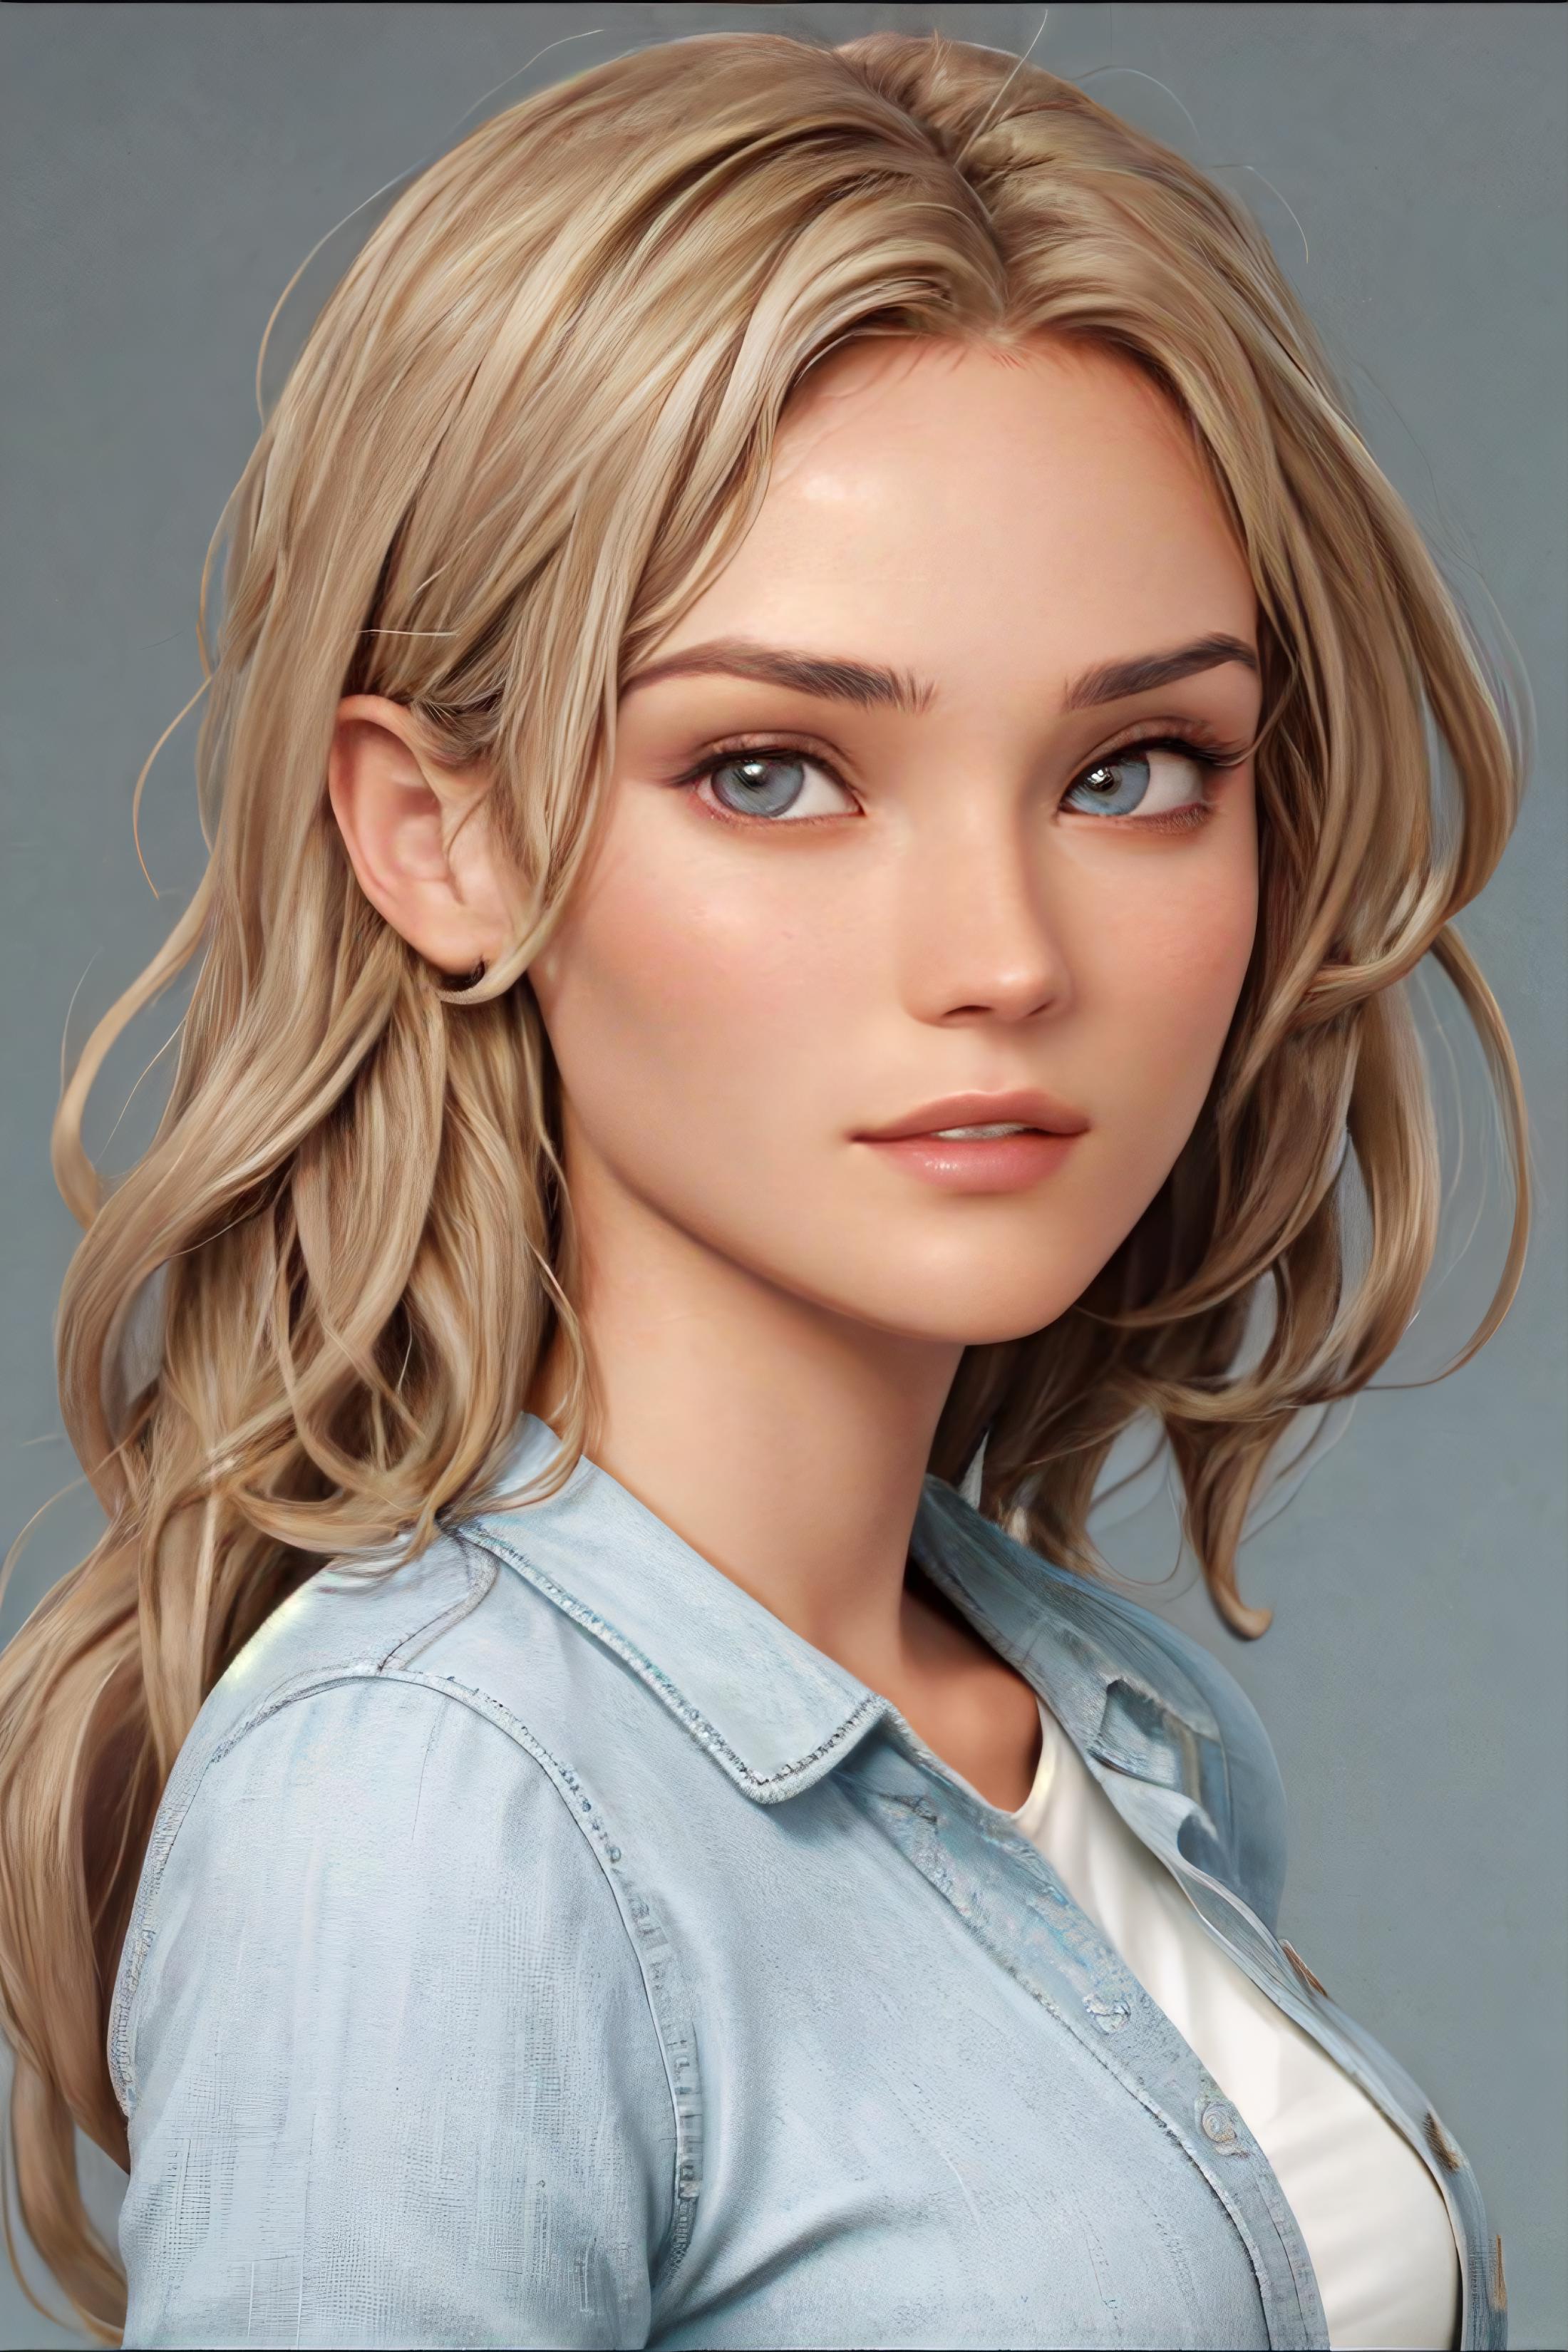 AI model image by __2_